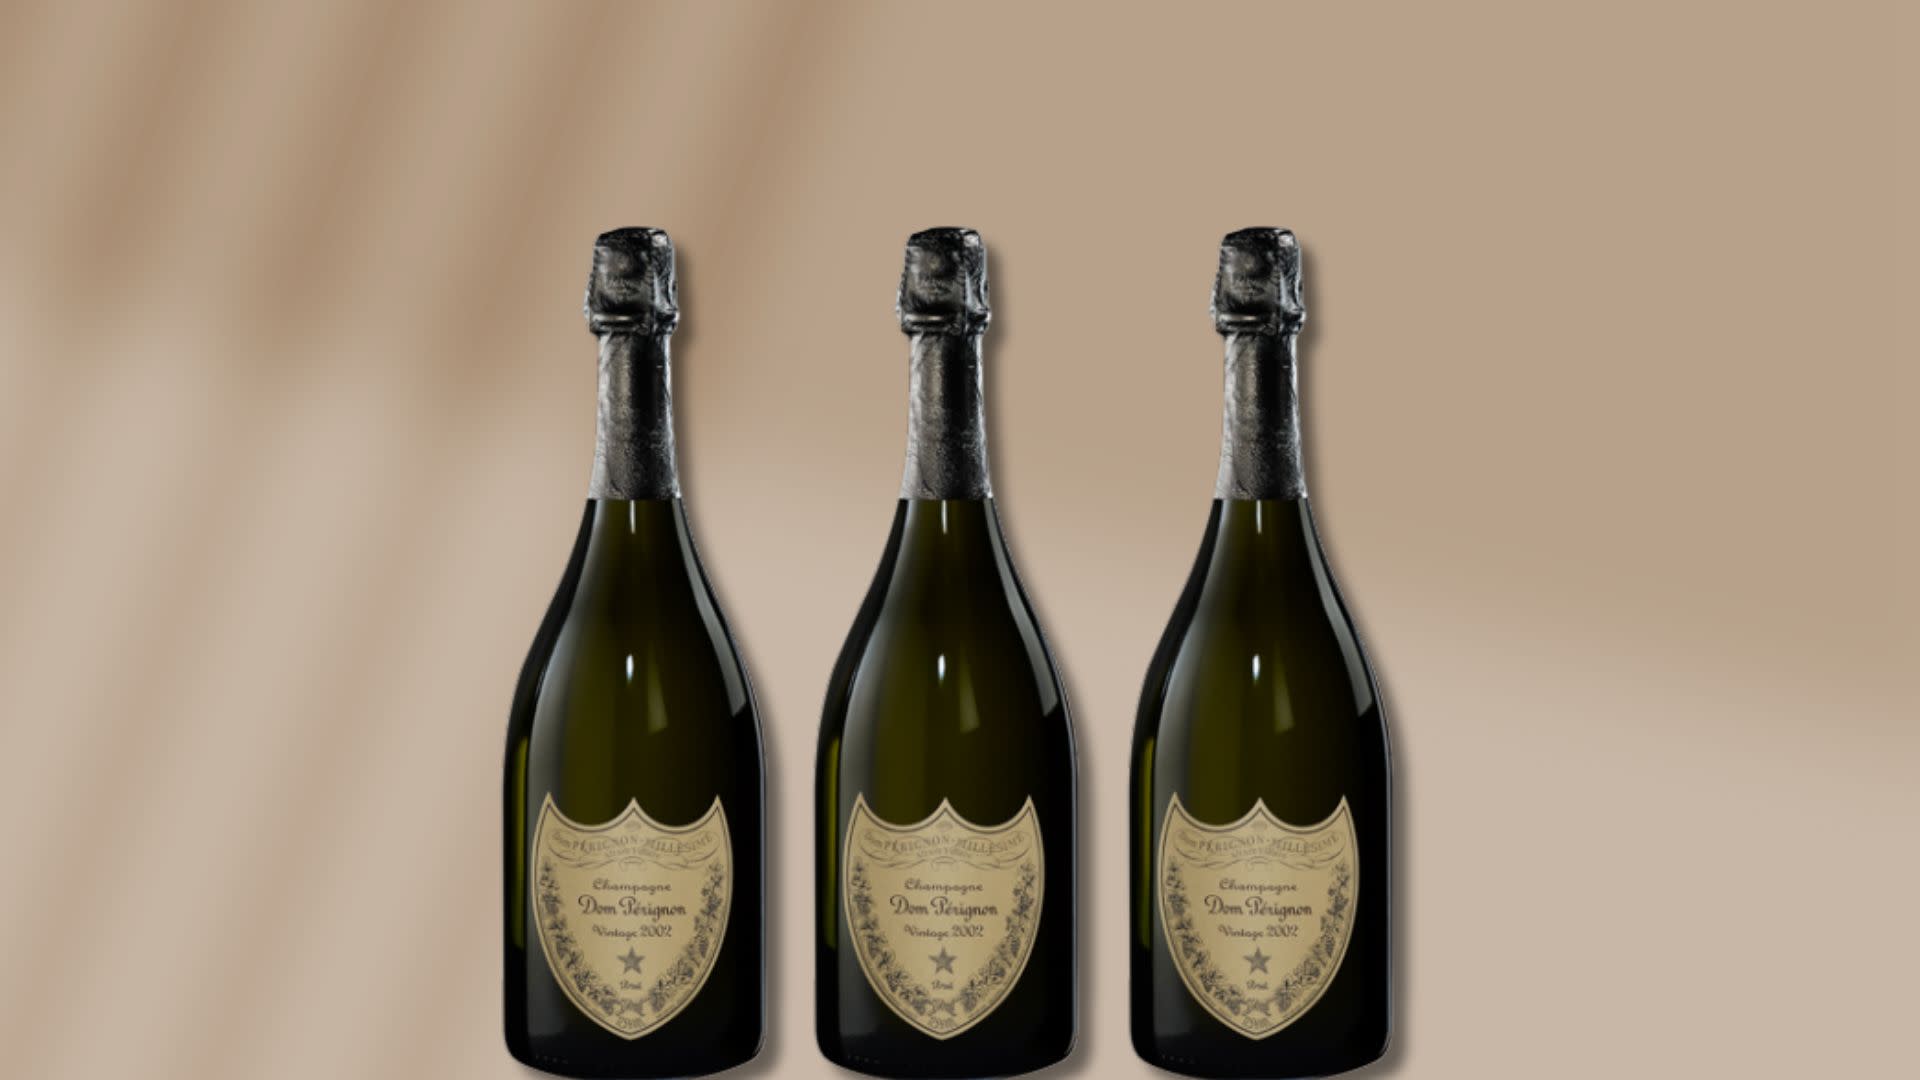 15 Best-Selling Champagne Brands & Vintages In 2021